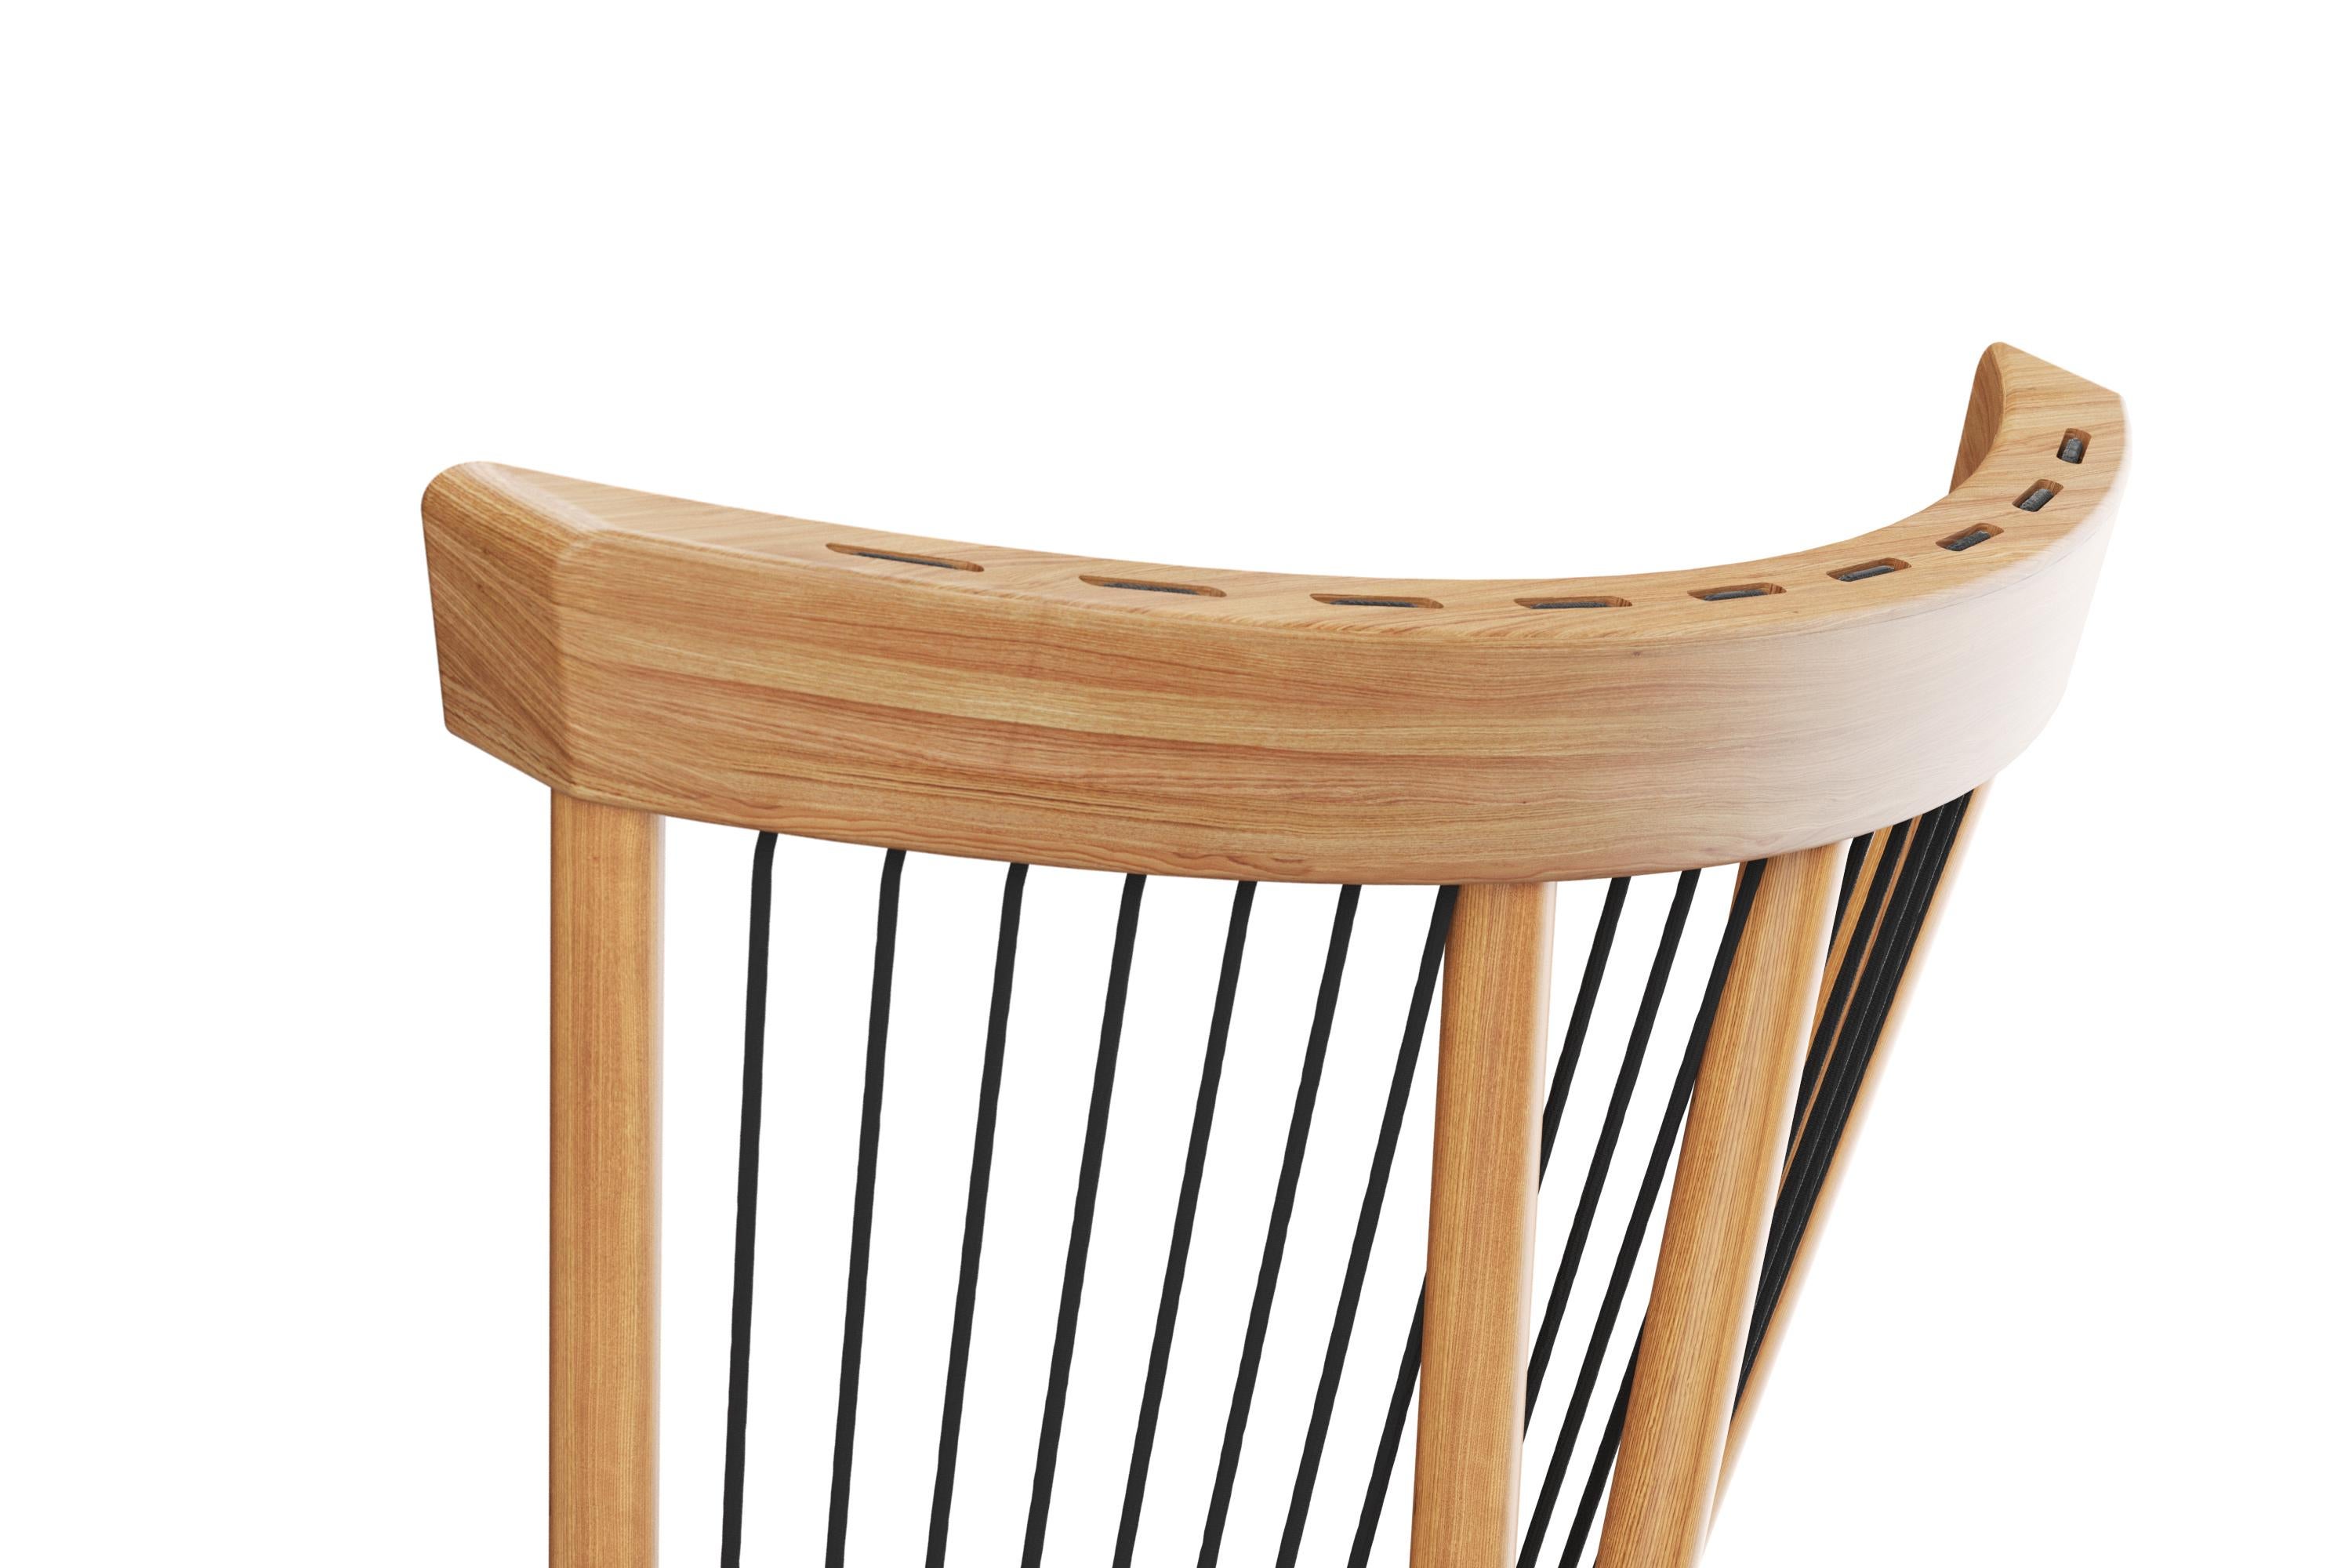 The Cuerdas Chair artfully reinterprets the classic Windsor chair, incorporating the warmth of solid oak with the distinctive touch of woven cords. In this innovative design, the wooden backrest is supported by four robust 22mm solid wood